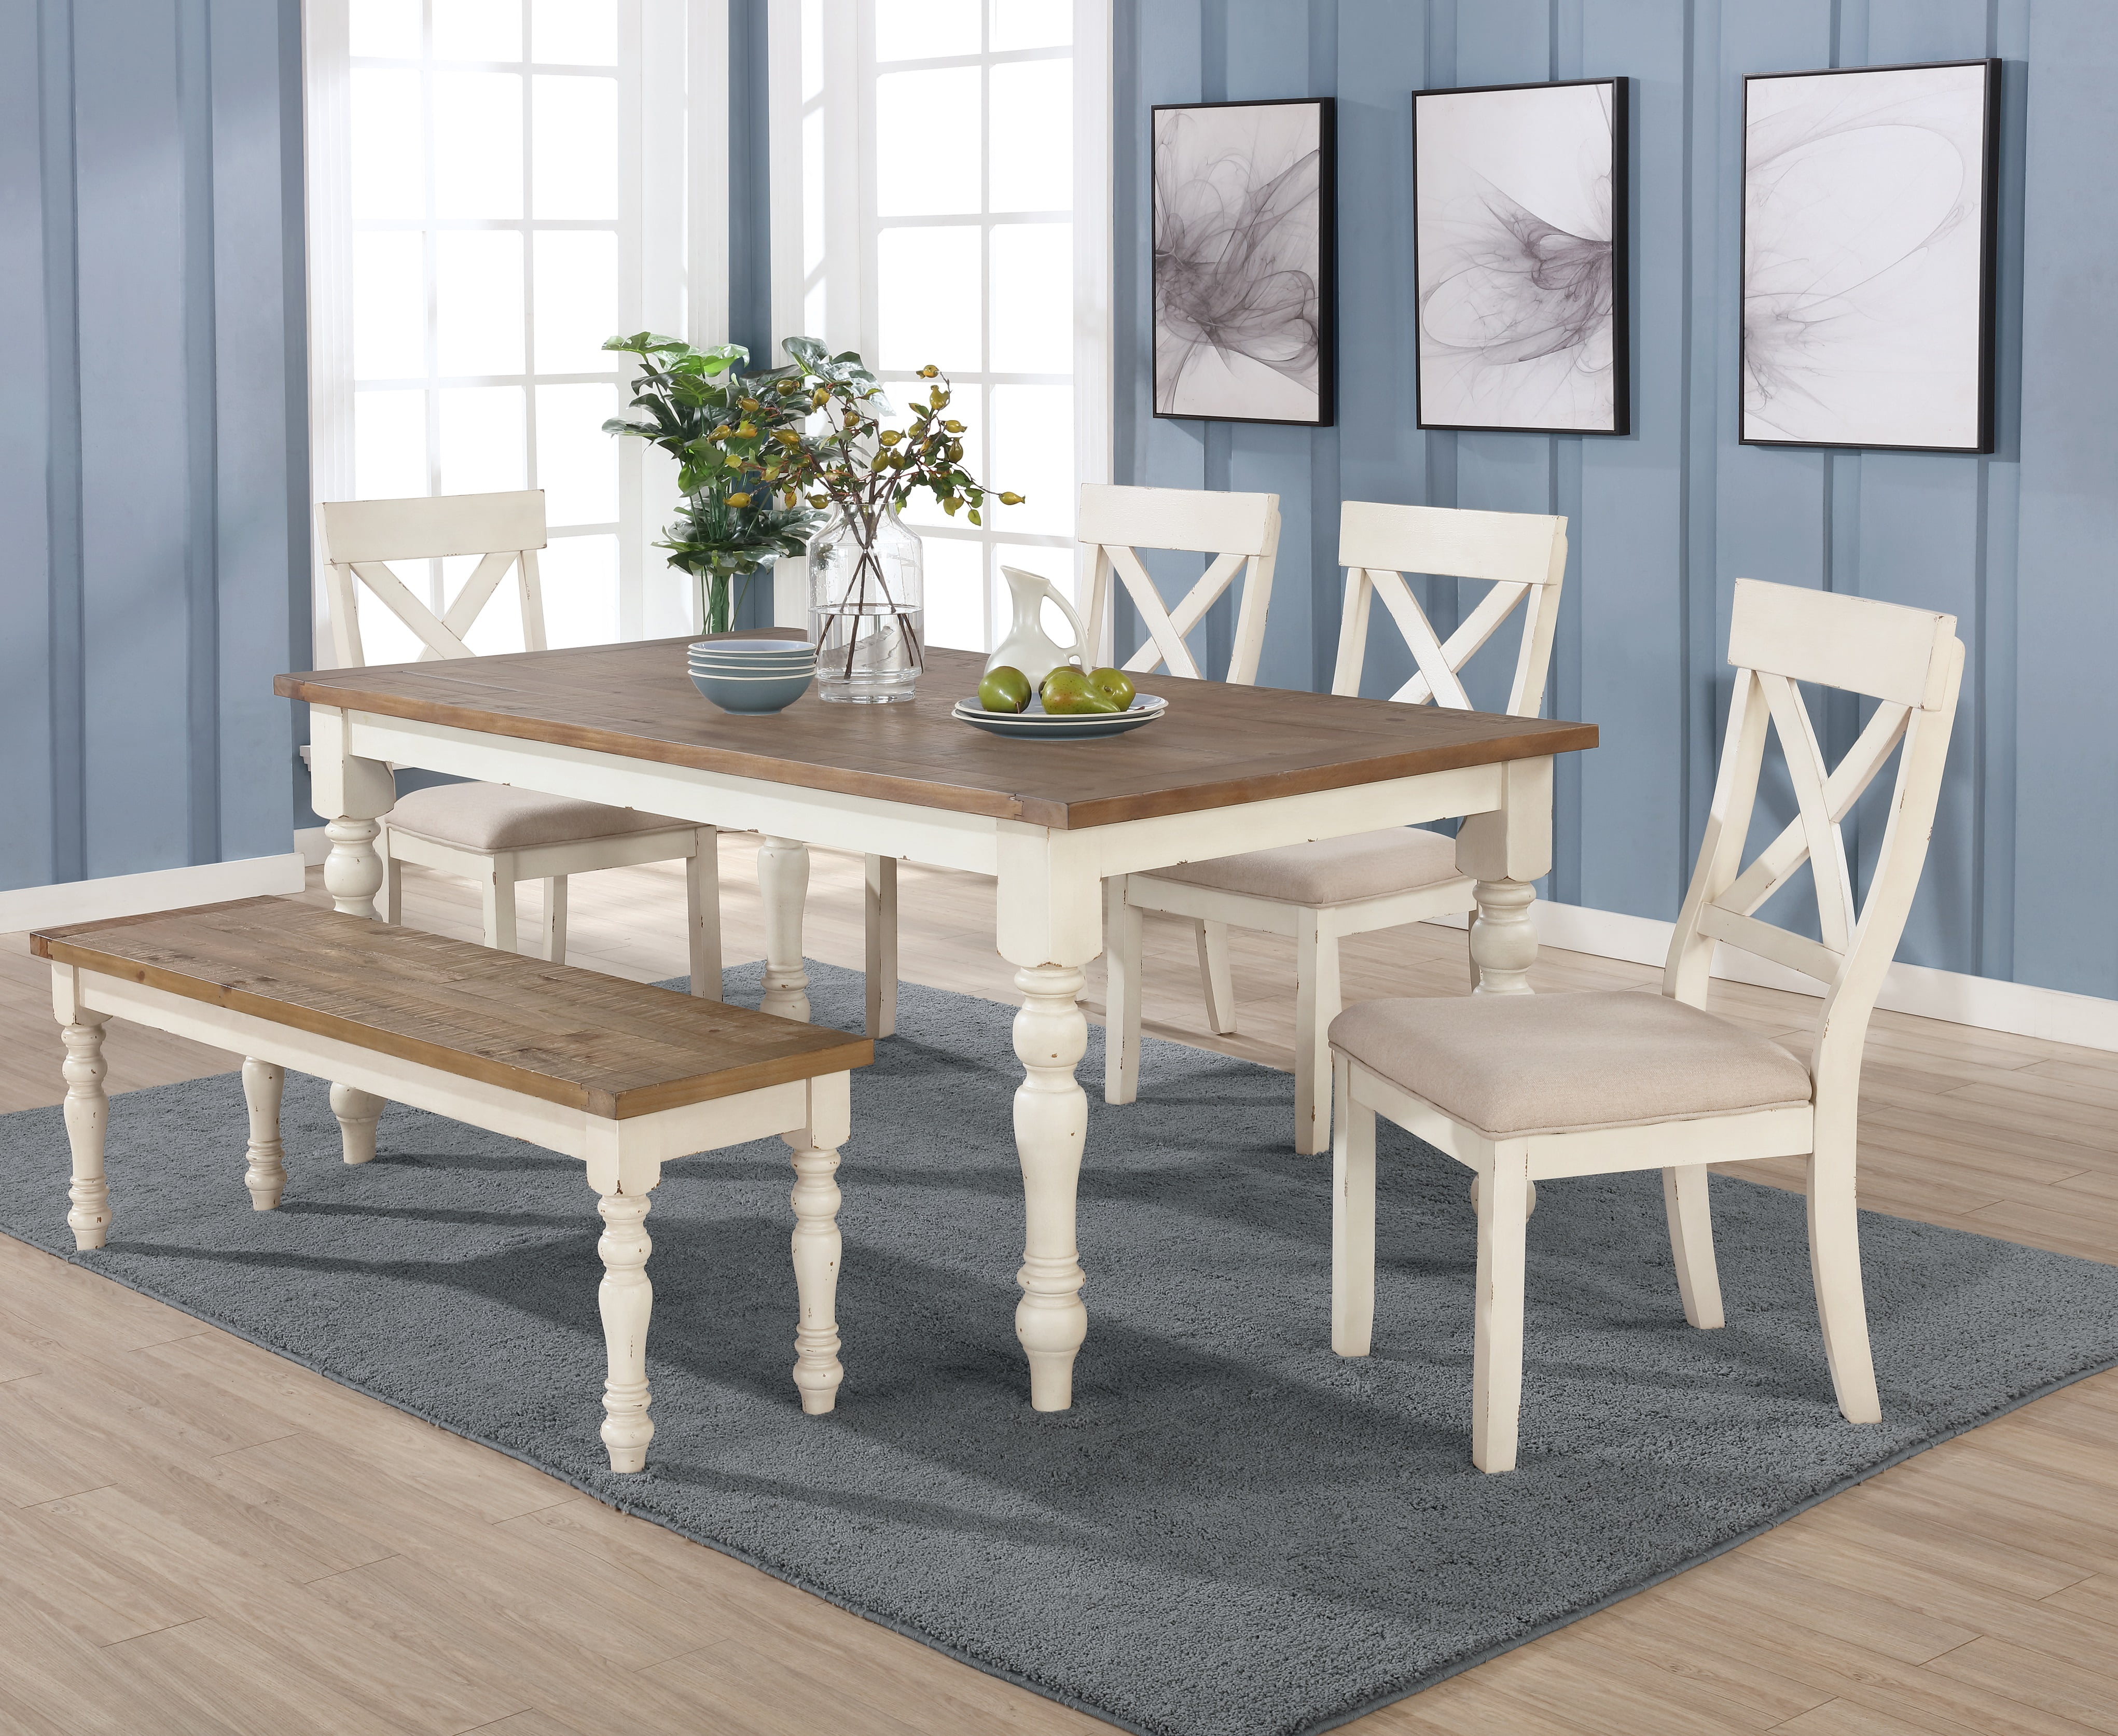  dining table with bench chairs